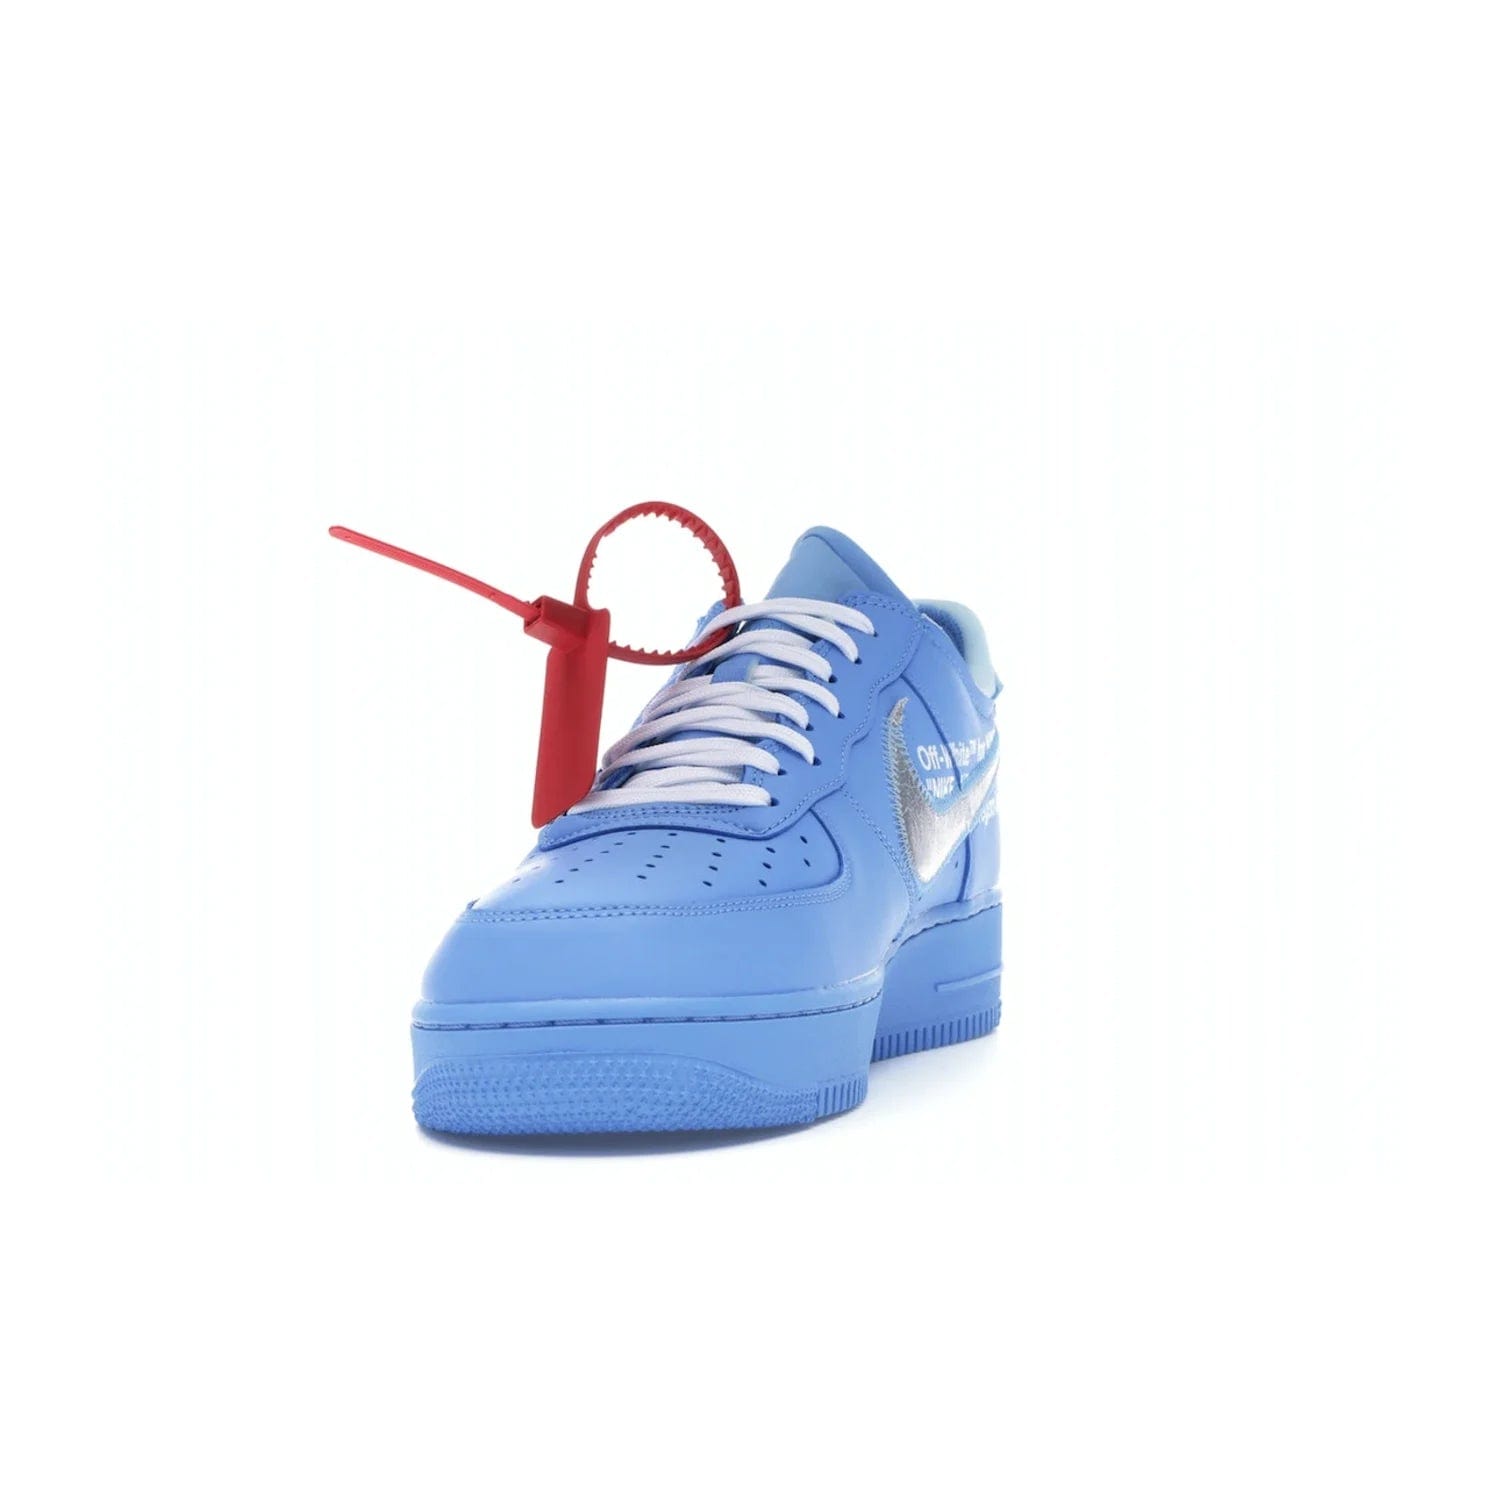 Nike Air Force 1 Low Off-White MCA University Blue - Image 12 - Only at www.BallersClubKickz.com - Virgil Abloh's Air Force 1 Low Off-White MCA University Blue: Features University Blue leather and midsole, reflective silver Nike Swoosh, red zip tie, white laces, and iconic Off-White™ branding. A must-have for any Virgil Abloh enthusiast.